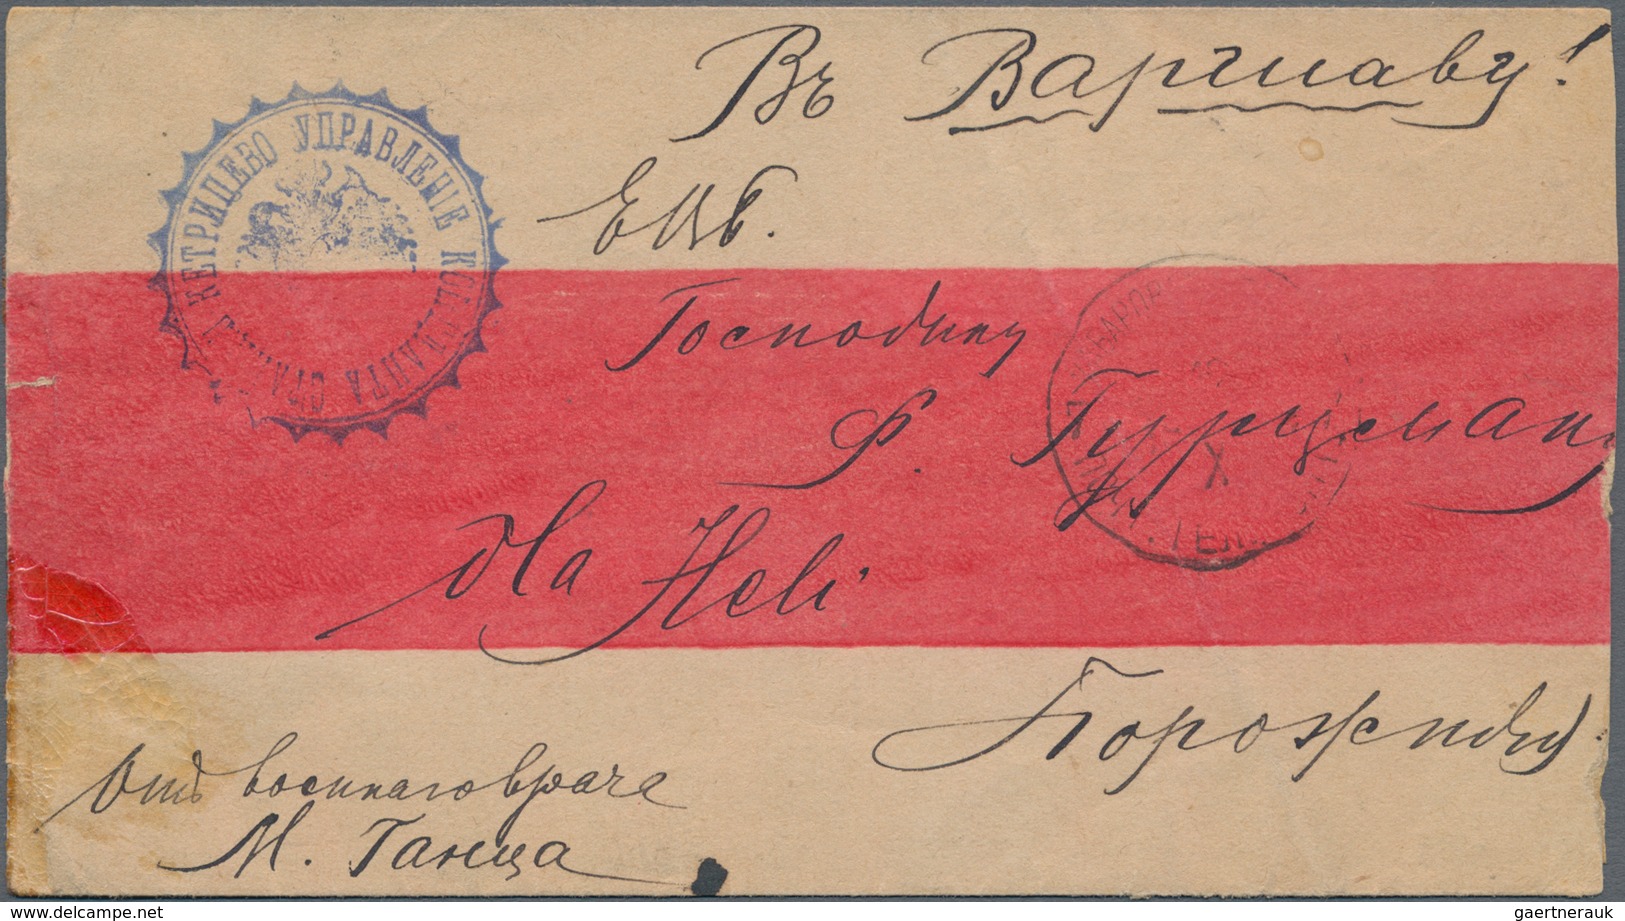 Russische Post In China: 12.10.1904 Russo-Japanese War Red-band Cover From Khabarovsk To Warsaw With - China